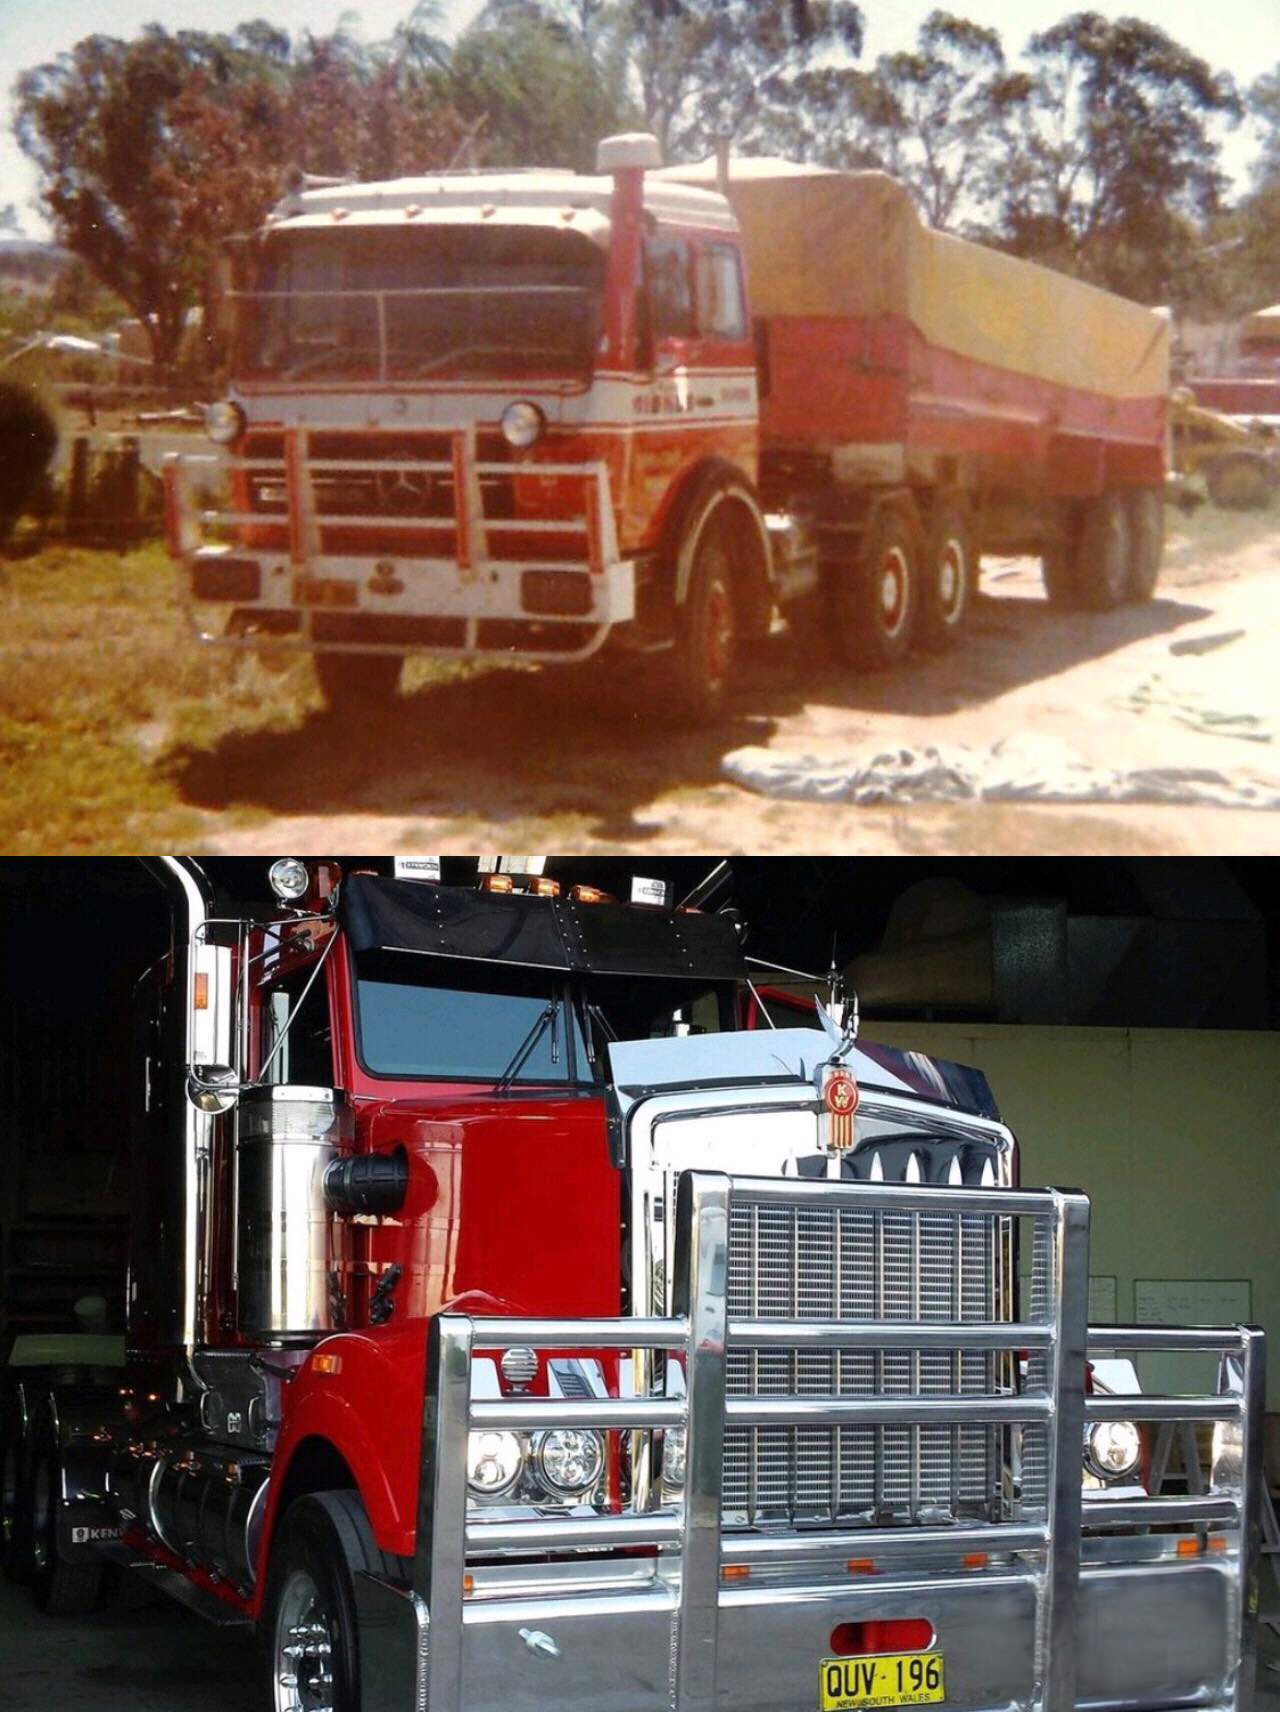 Photo of an old truck versus the latest Miskles red truck